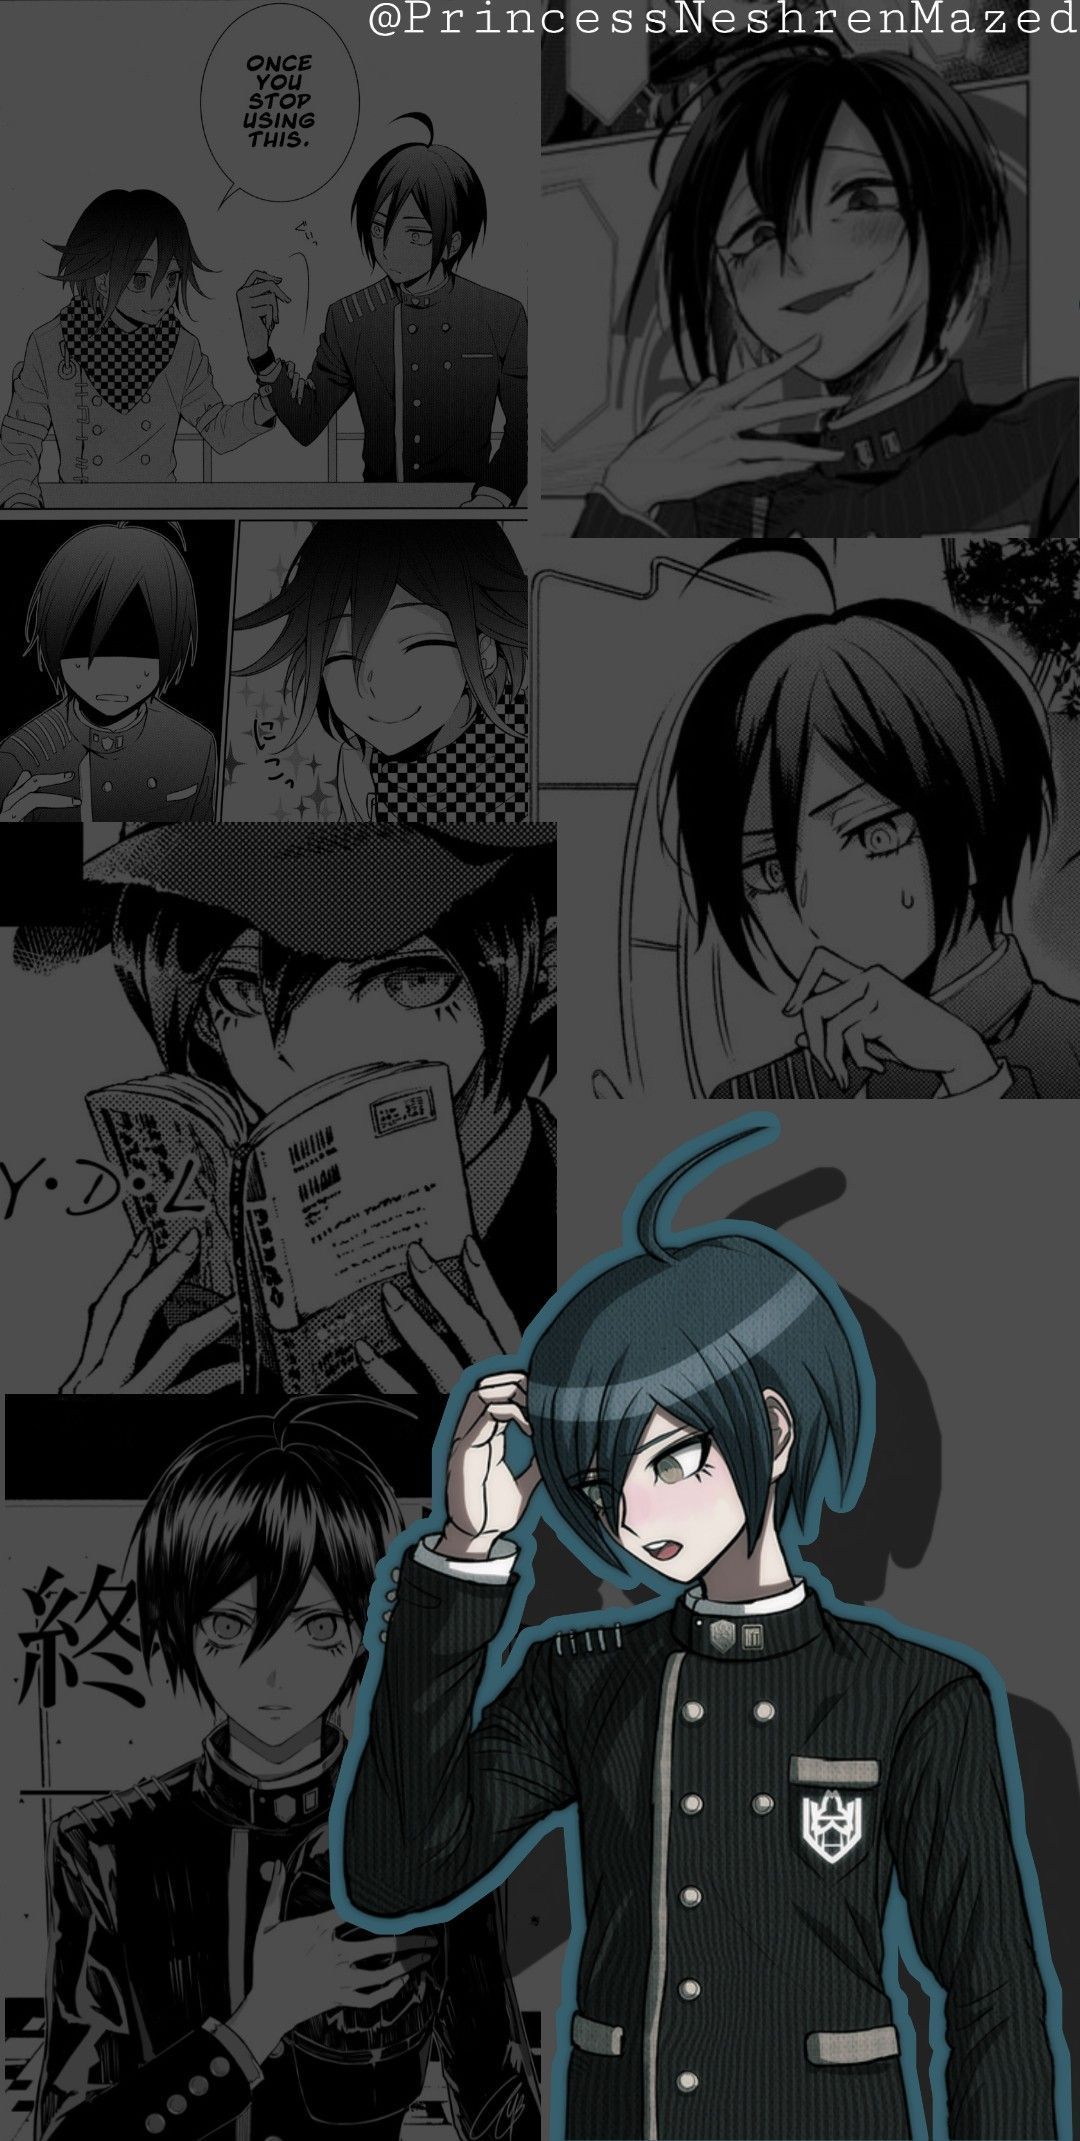 A series of images with different characters - Danganronpa